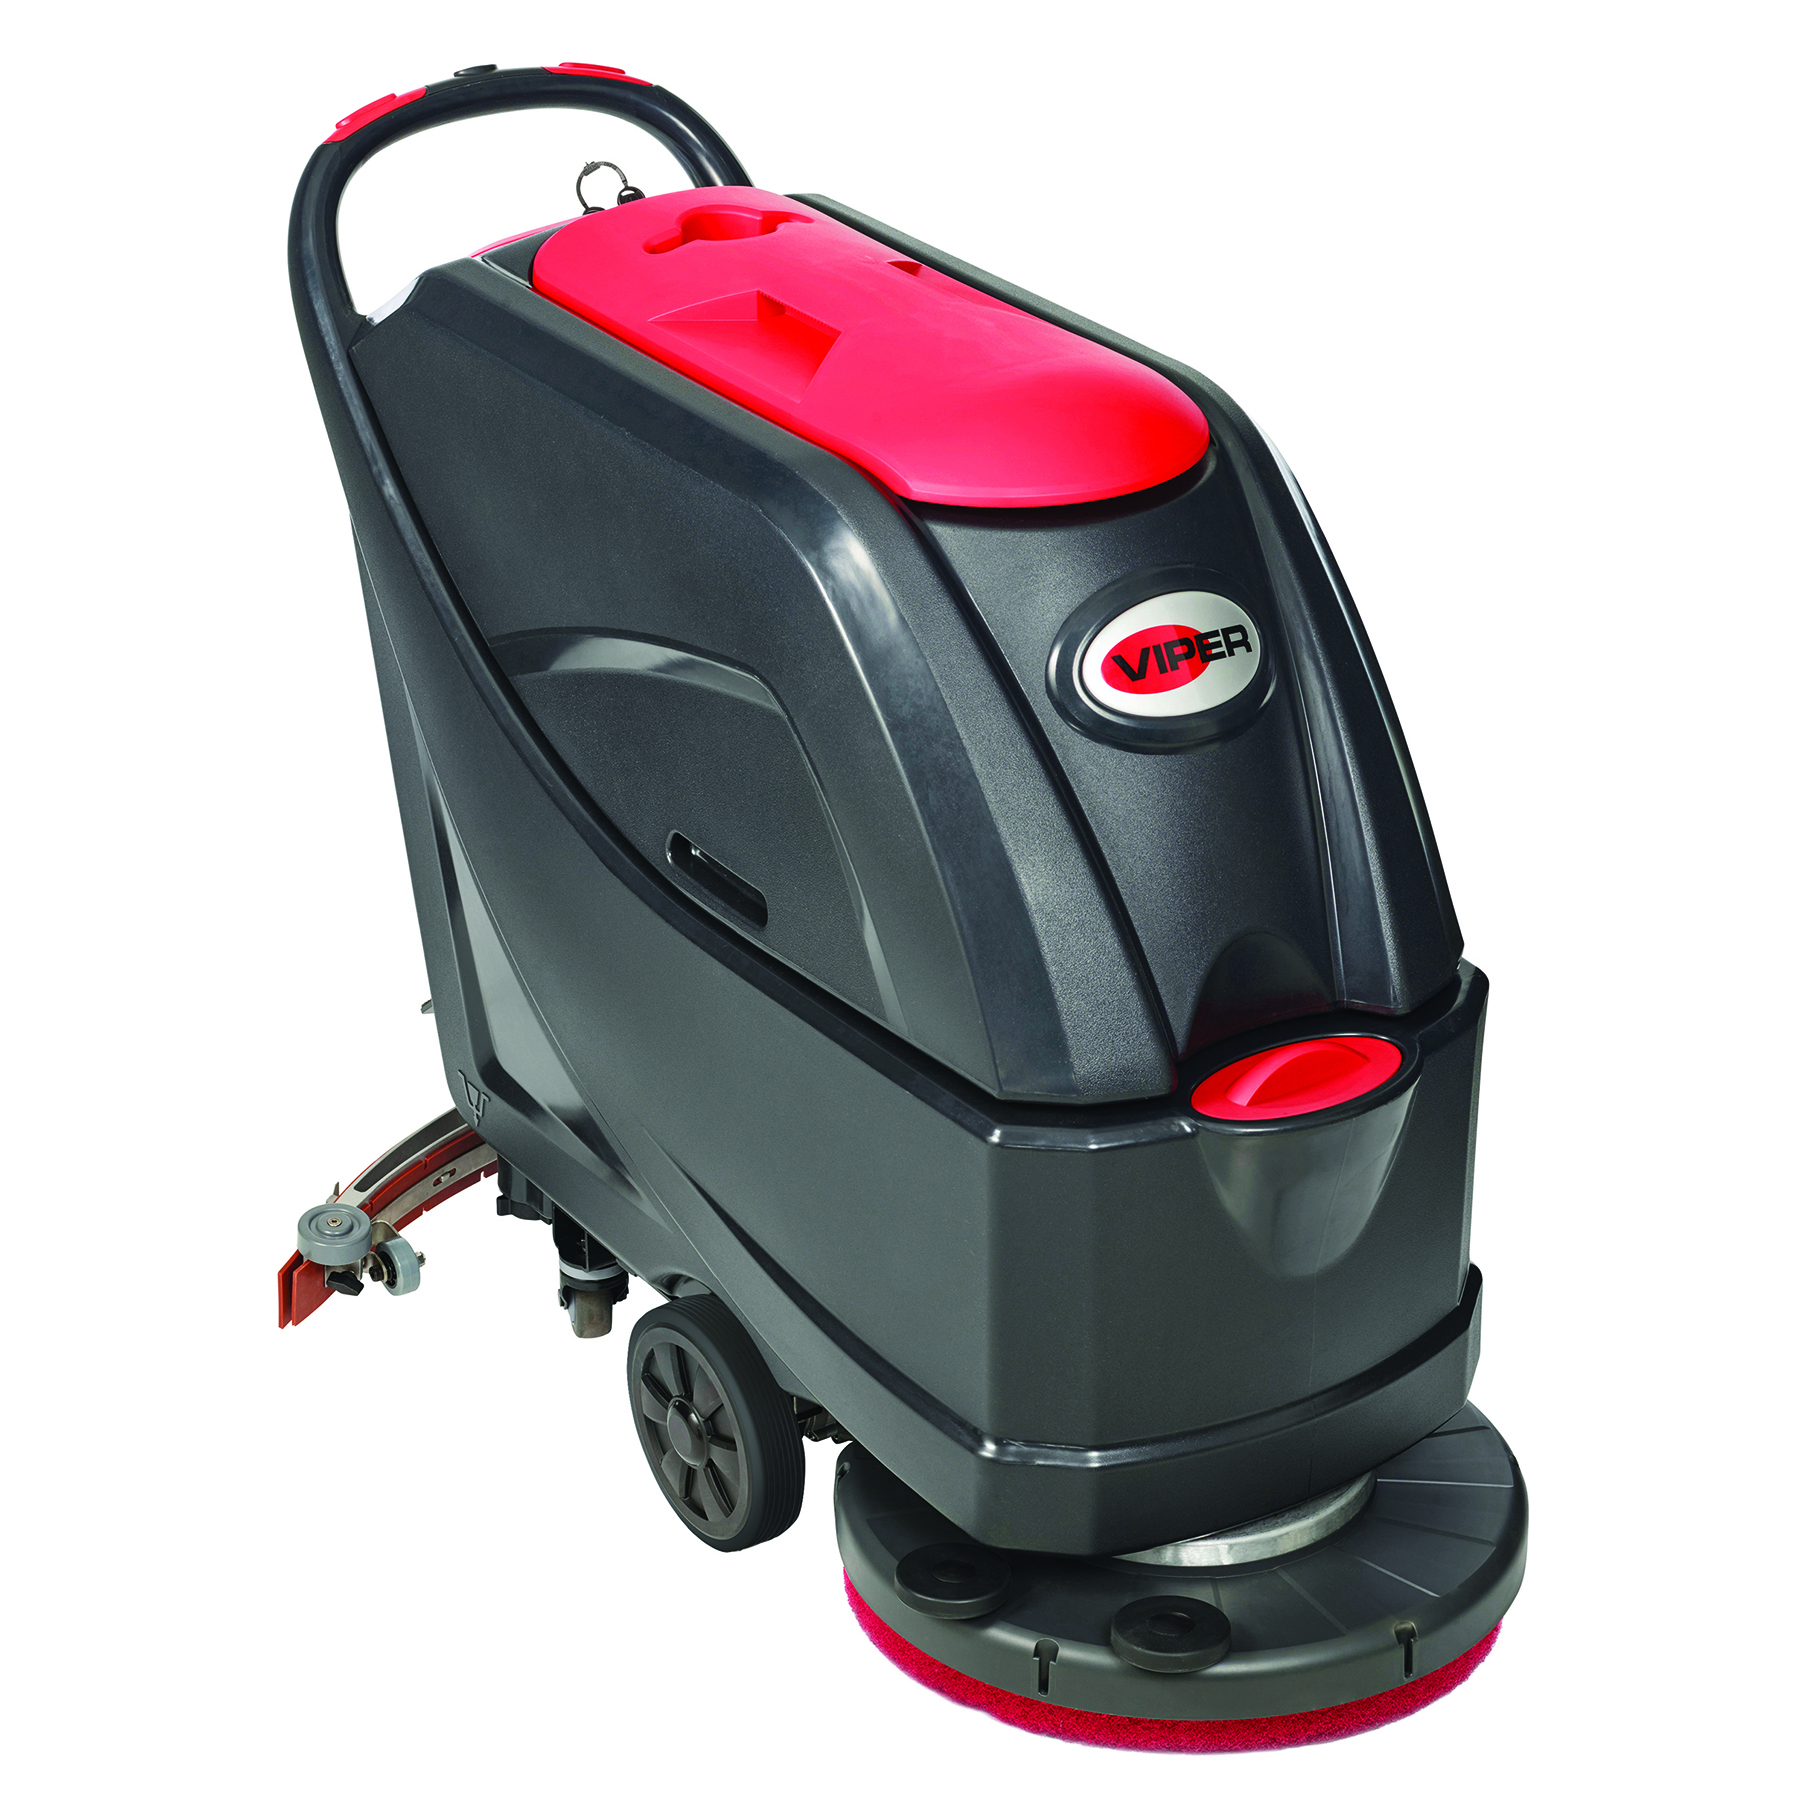 AS5160 Viper 20&quot; auto
scrubber, 16-gallon,
pad-assist, pad driver, 31&quot;
squeegee assembly, onboard
charger, 105 a/h AGM batteries